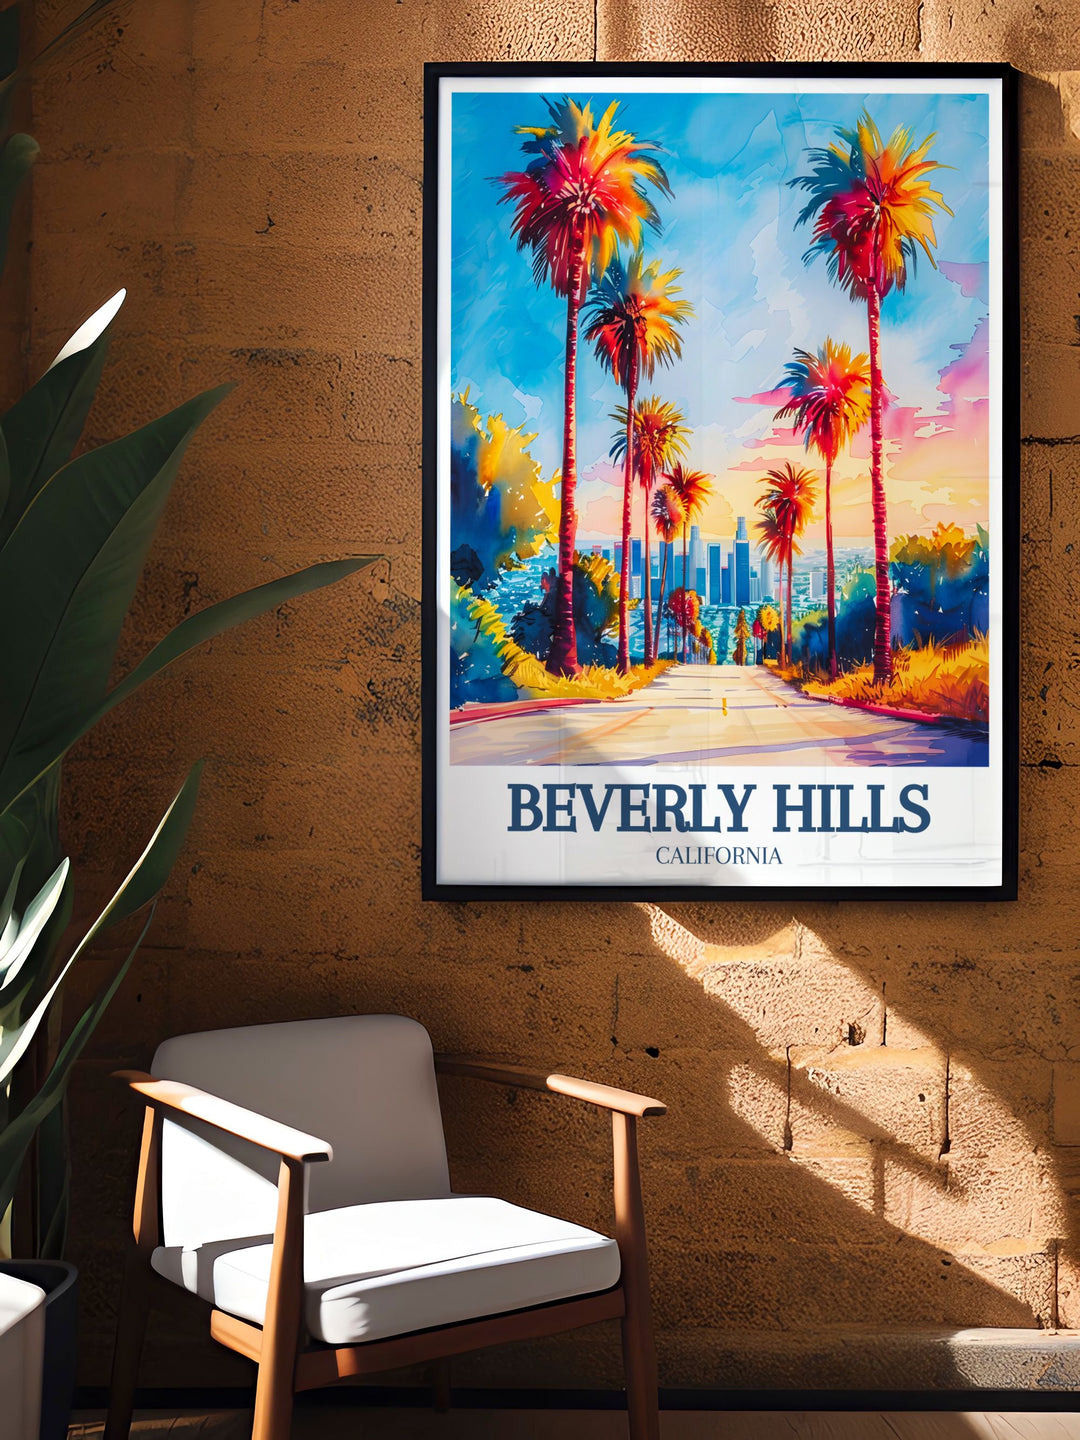 Captivating Beverly Hills travel poster capturing the lively Sunset Boulevard and the picturesque Los Angeles cityscape, perfect for enhancing your home or office with Californias iconic beauty.